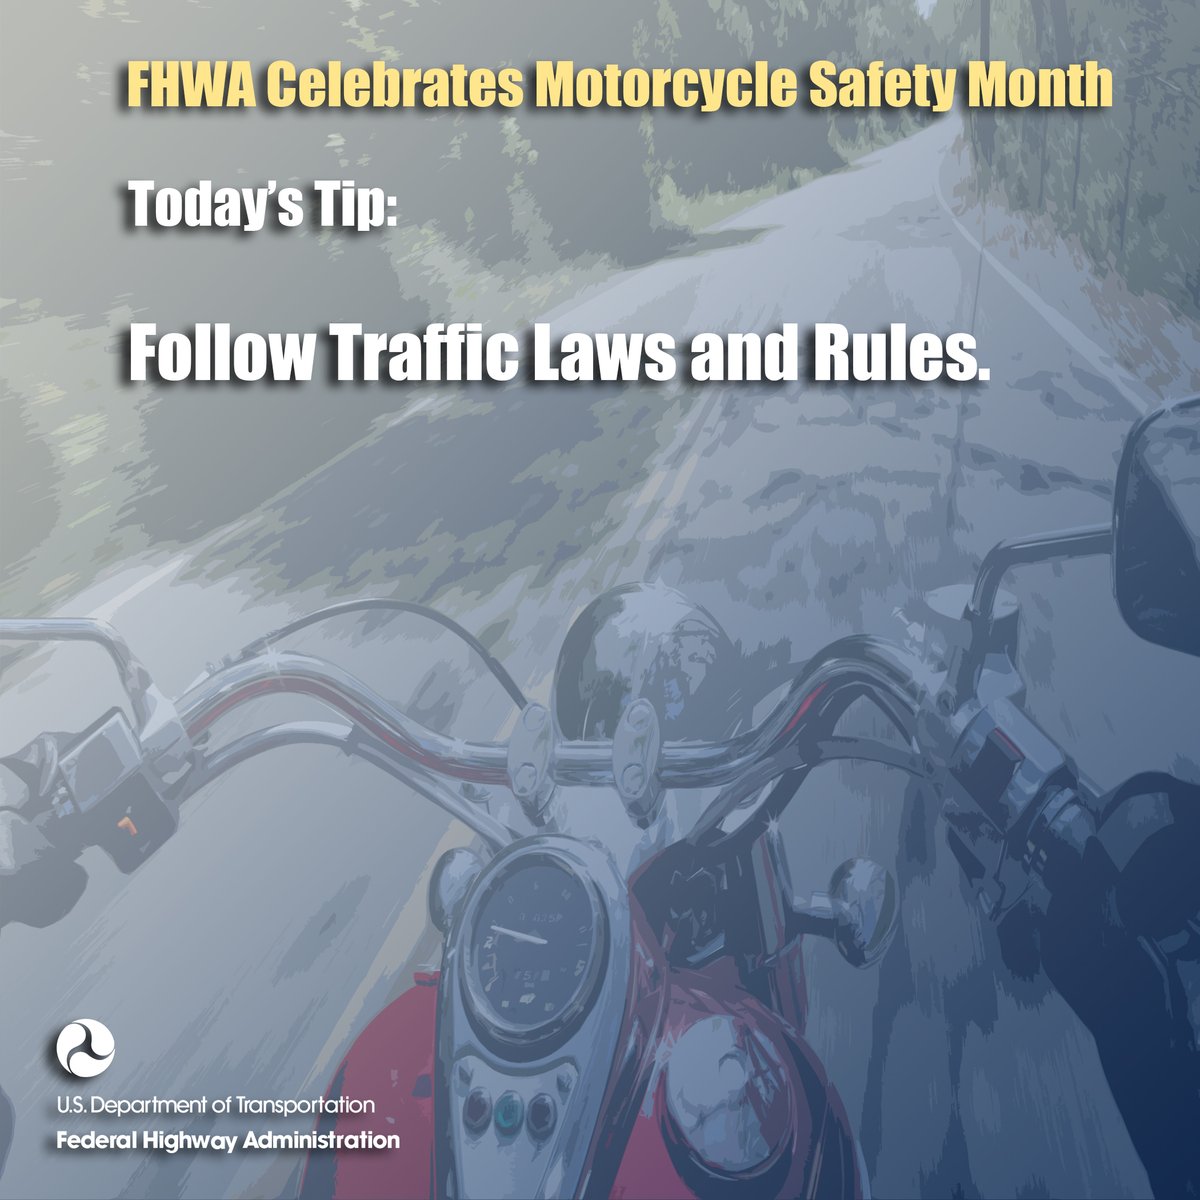 It's Motorcycle Safety Month. Today’s tip: follow traffic laws and rules. #MotorcycleSafetyMonth